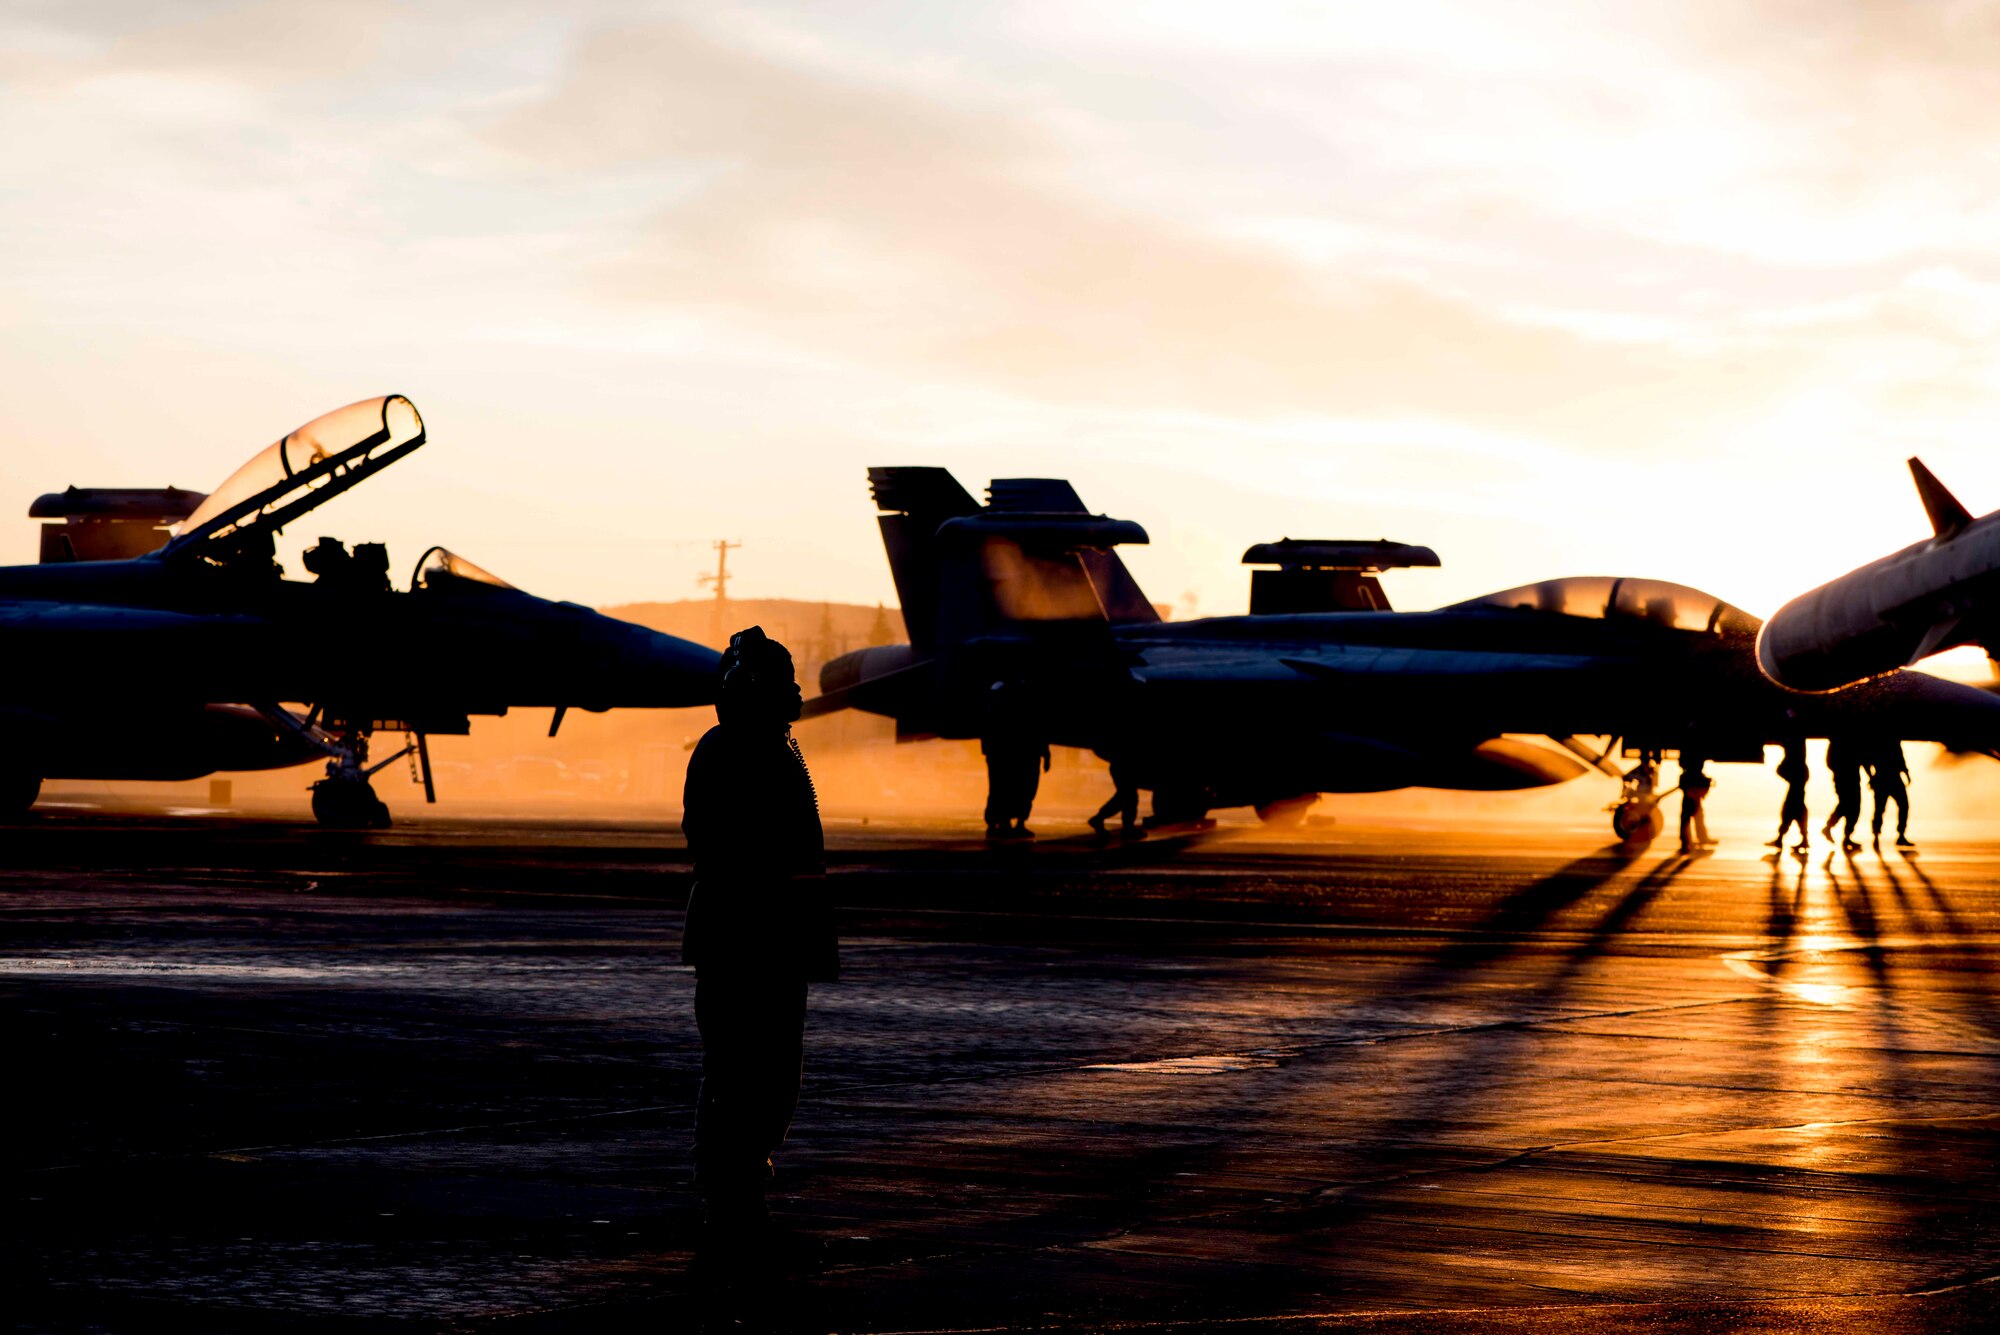 U.S Air Force Airman 1st Class Shaheed Gillespie, a 35th Maintenance Squadron aircraft fuel systems repairer, stands on the flight line during exercise RED FLAG Alaska 19-1 at Eielson Air Force Base, Alaska, Oct. 12, 2018. Maintainers repaired jets alongside joint and multilateral partners from around the world during RF-A 19-1, affording them opportunities to exchange tactics, operations techniques and procedures. (U.S. Air Force photo by Airman 1st Class Collette Brooks)